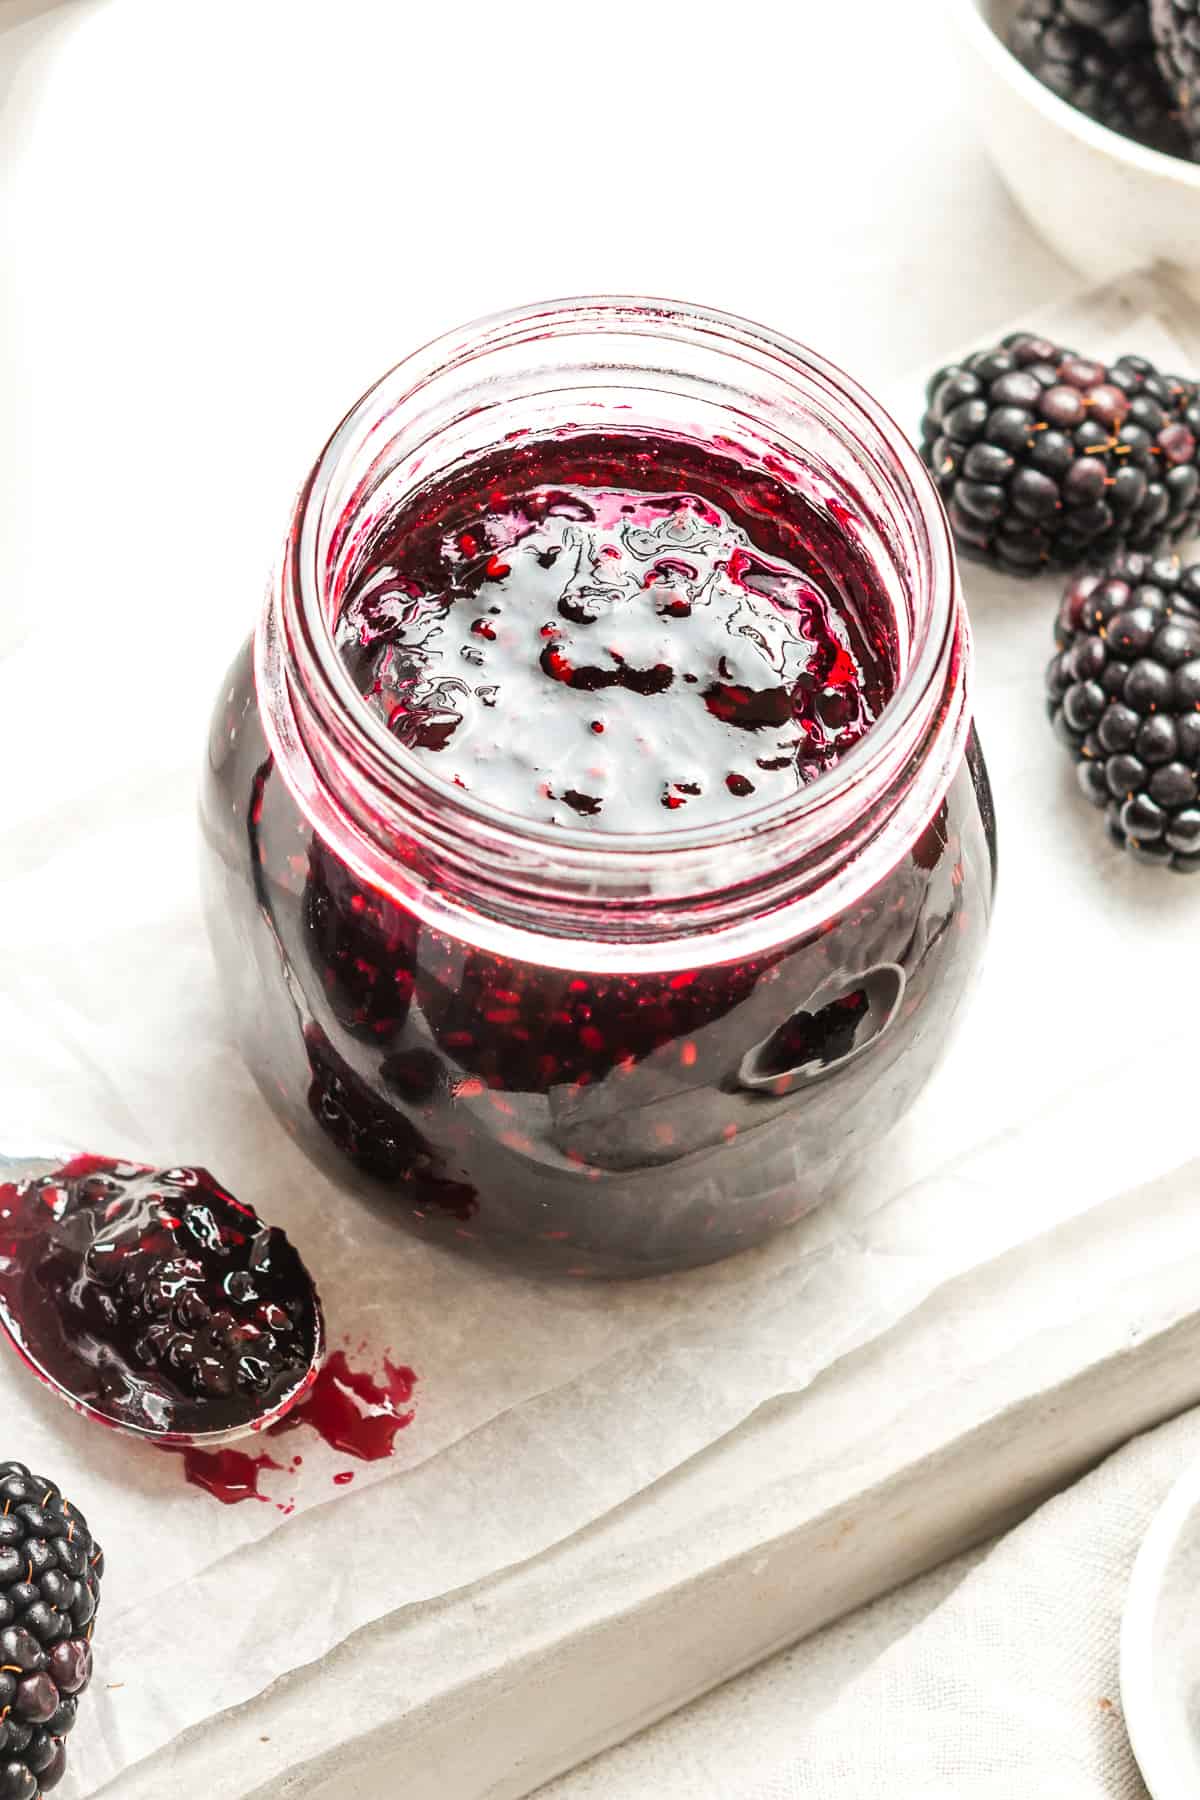 Open jar of jam, sitting on some white paper, with some blackberries around the edge.